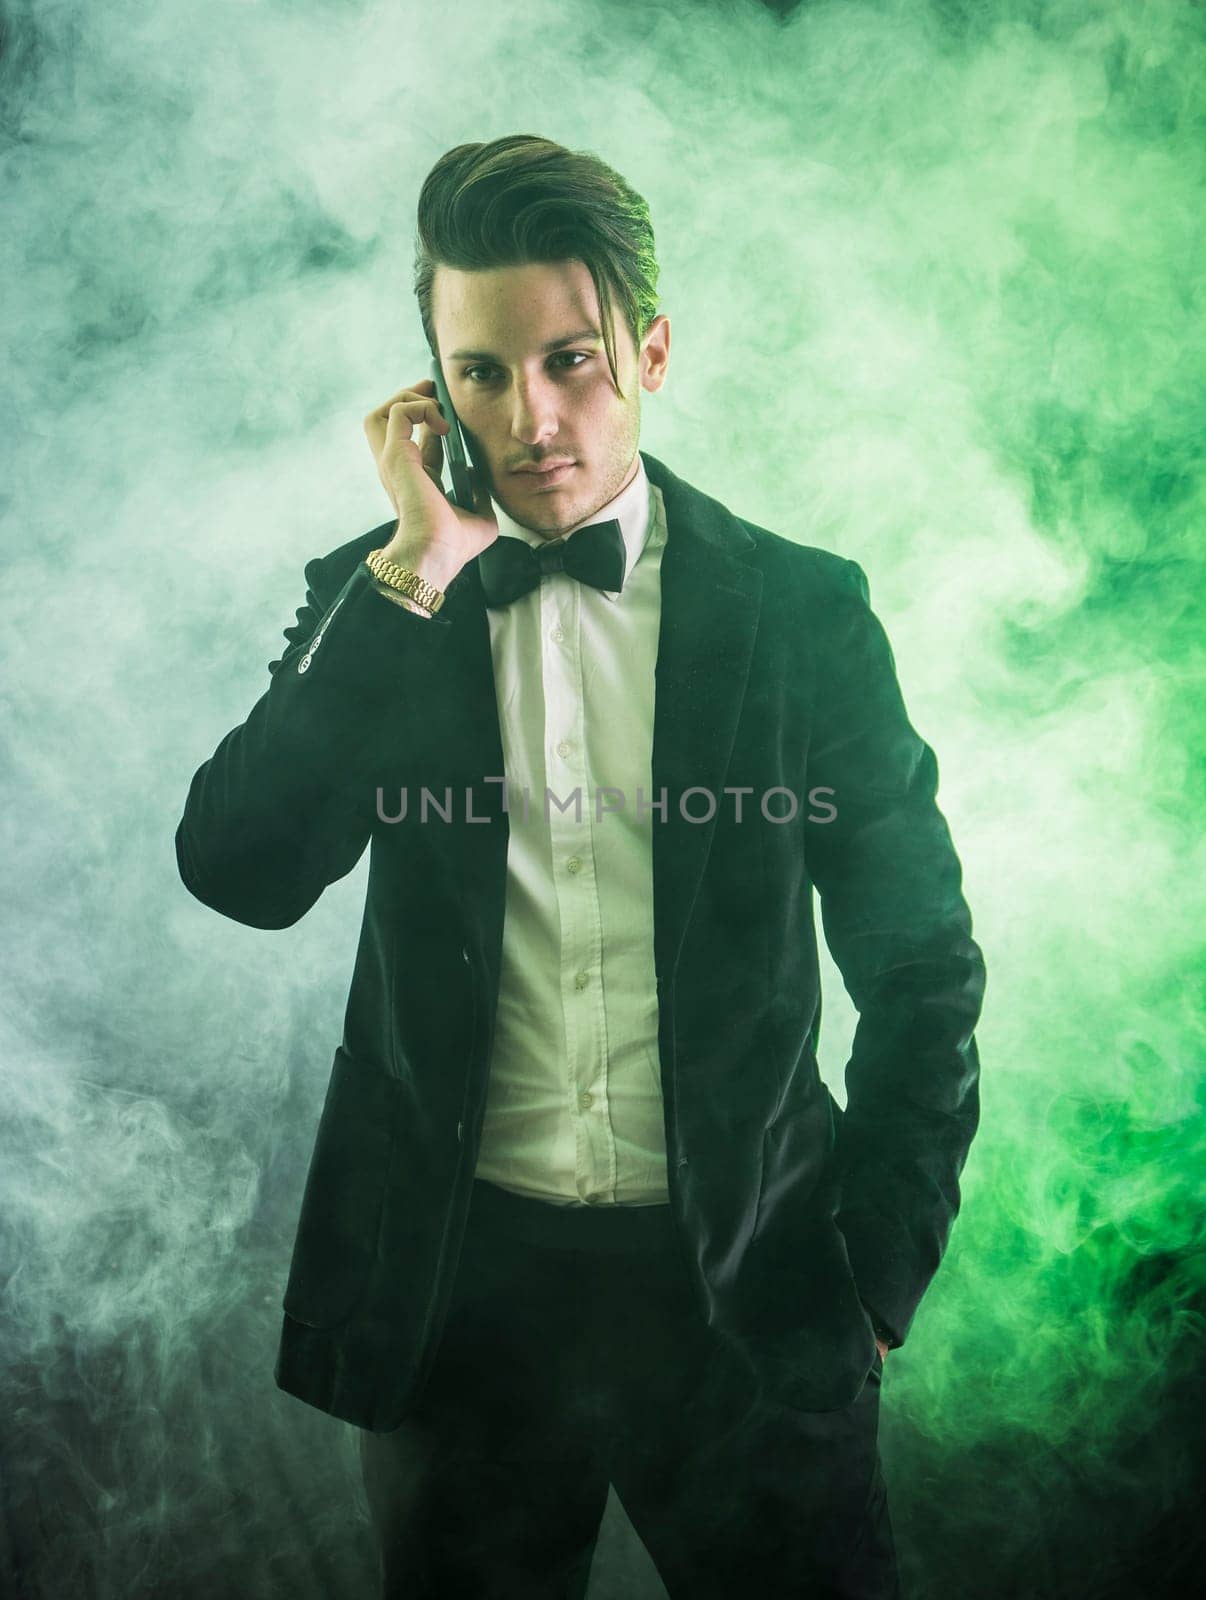 Photo of a well-dressed man having a phone conversation in formal attire by artofphoto